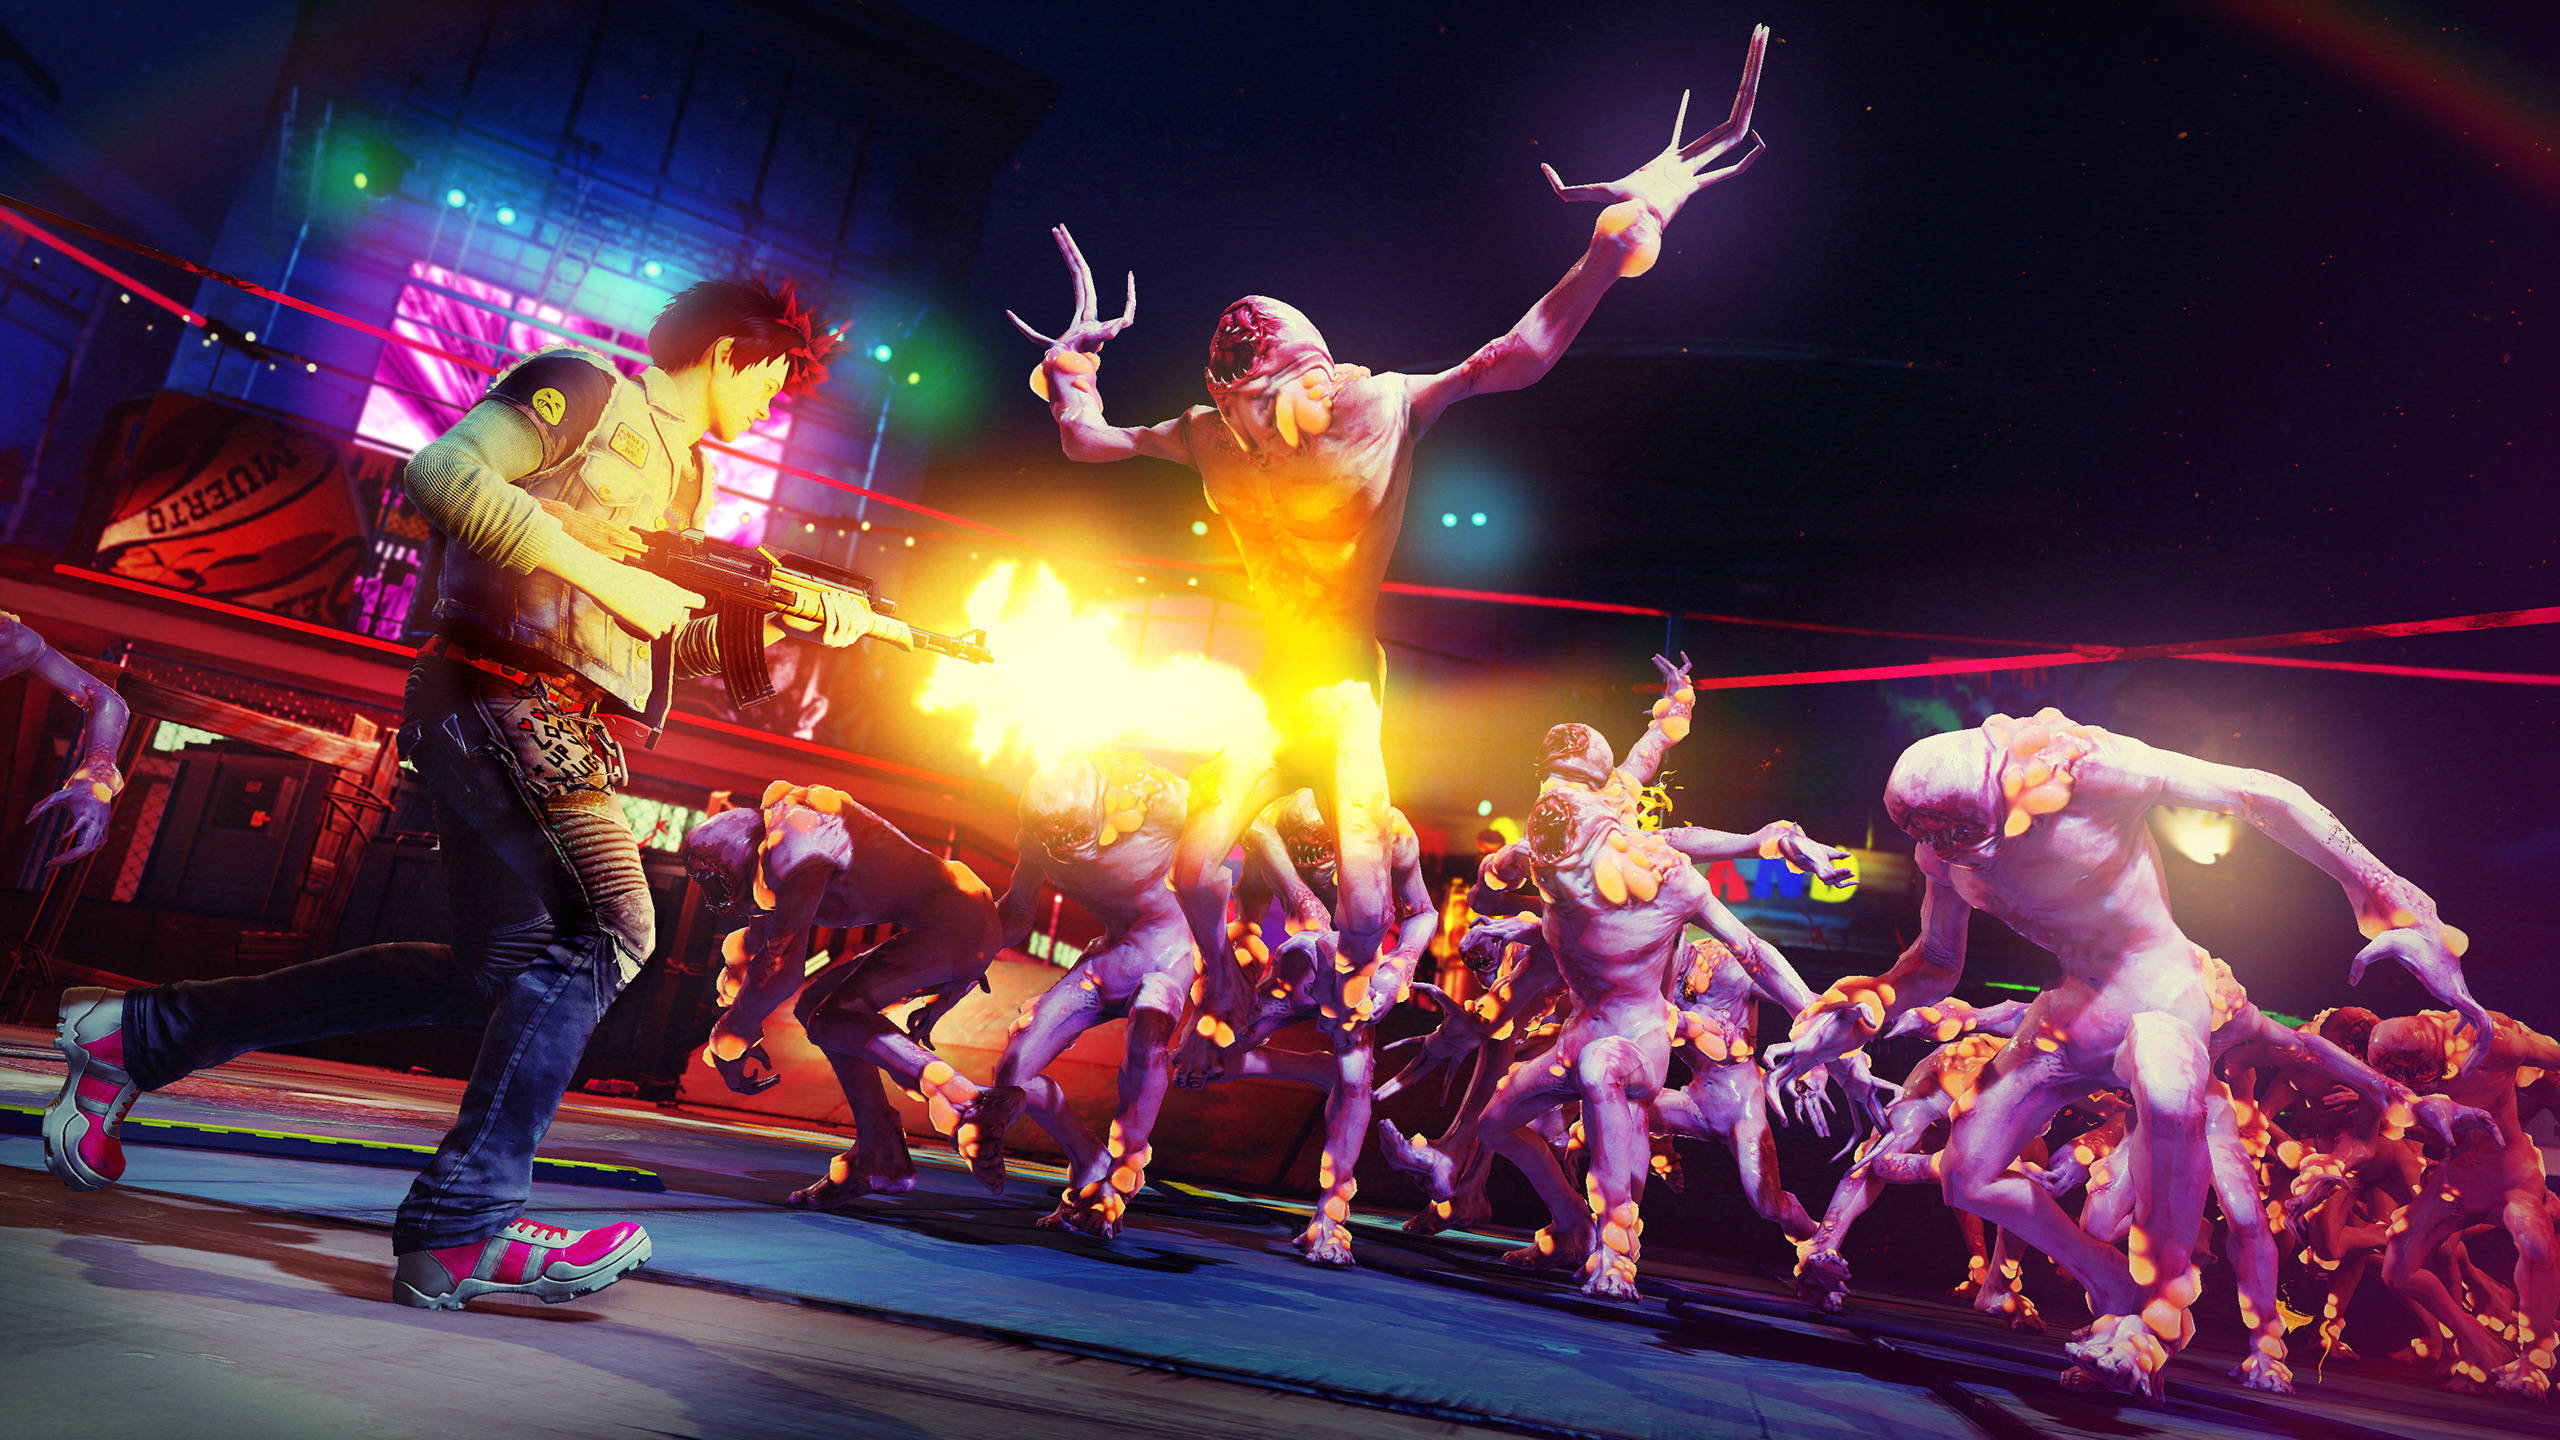 Our First Real Look At Sunset Overdrive